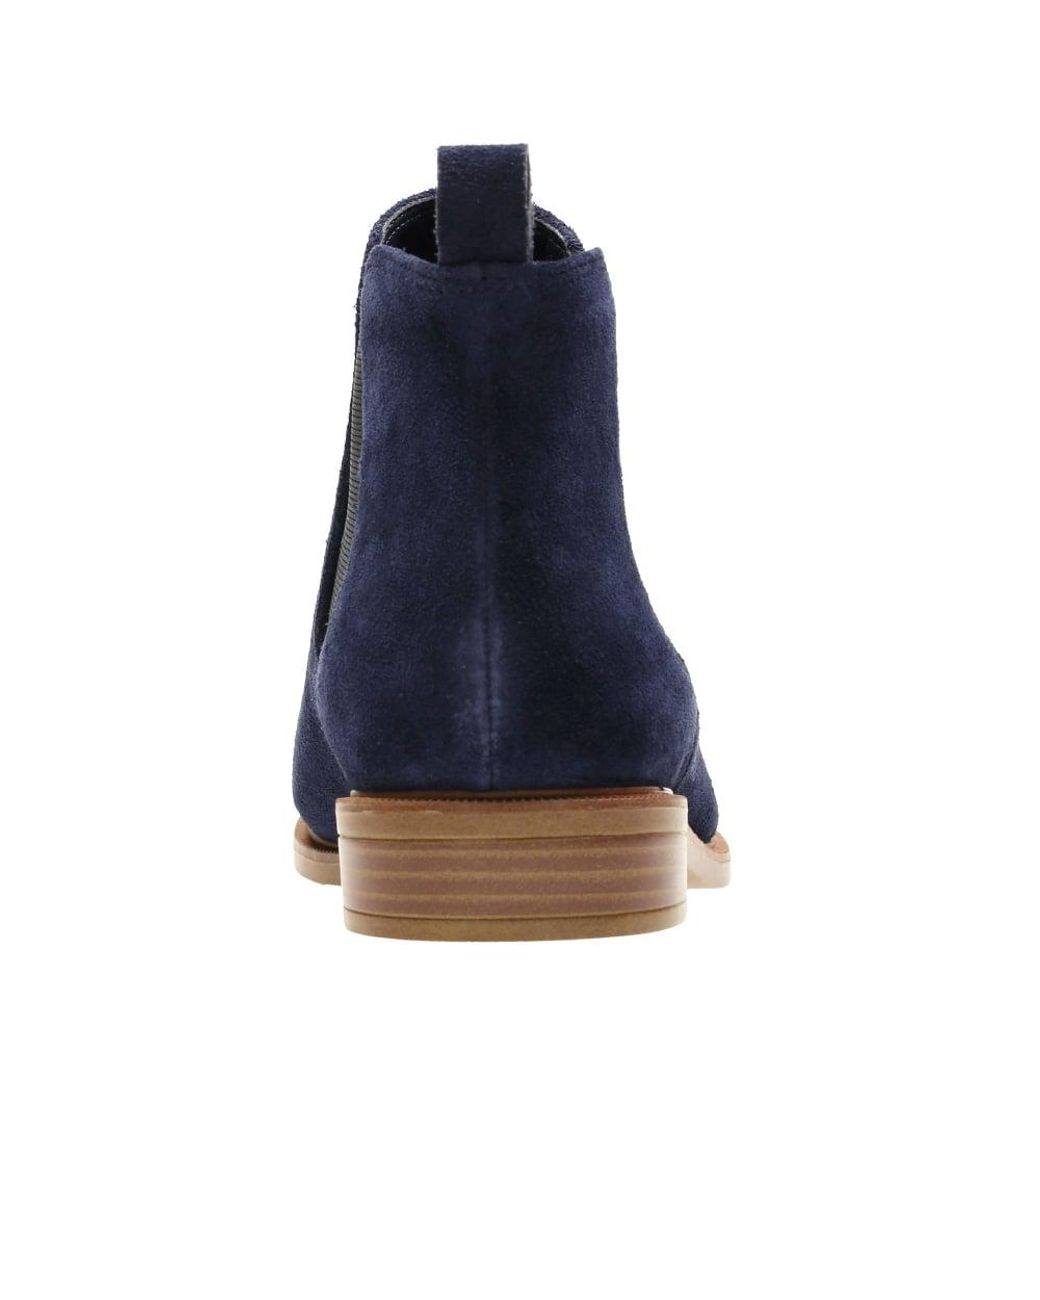 clarks navy taylor shine suede chelsea boots